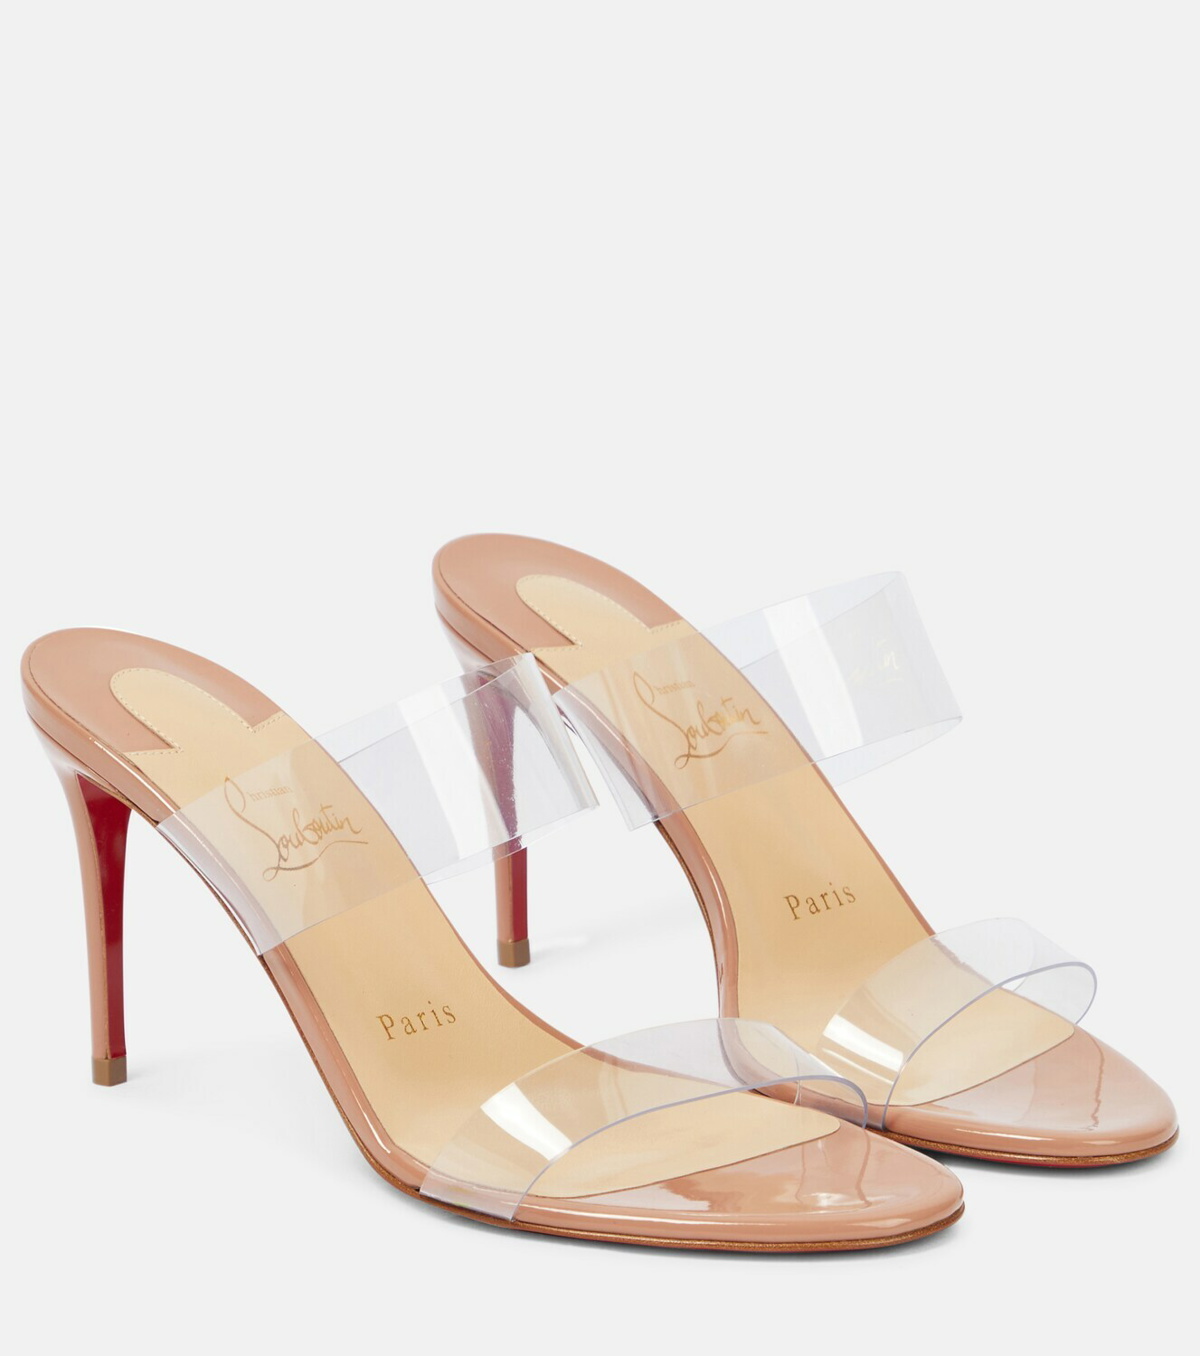 Shoes, Just Nothing Christian Louboutin Slide Sandal Red